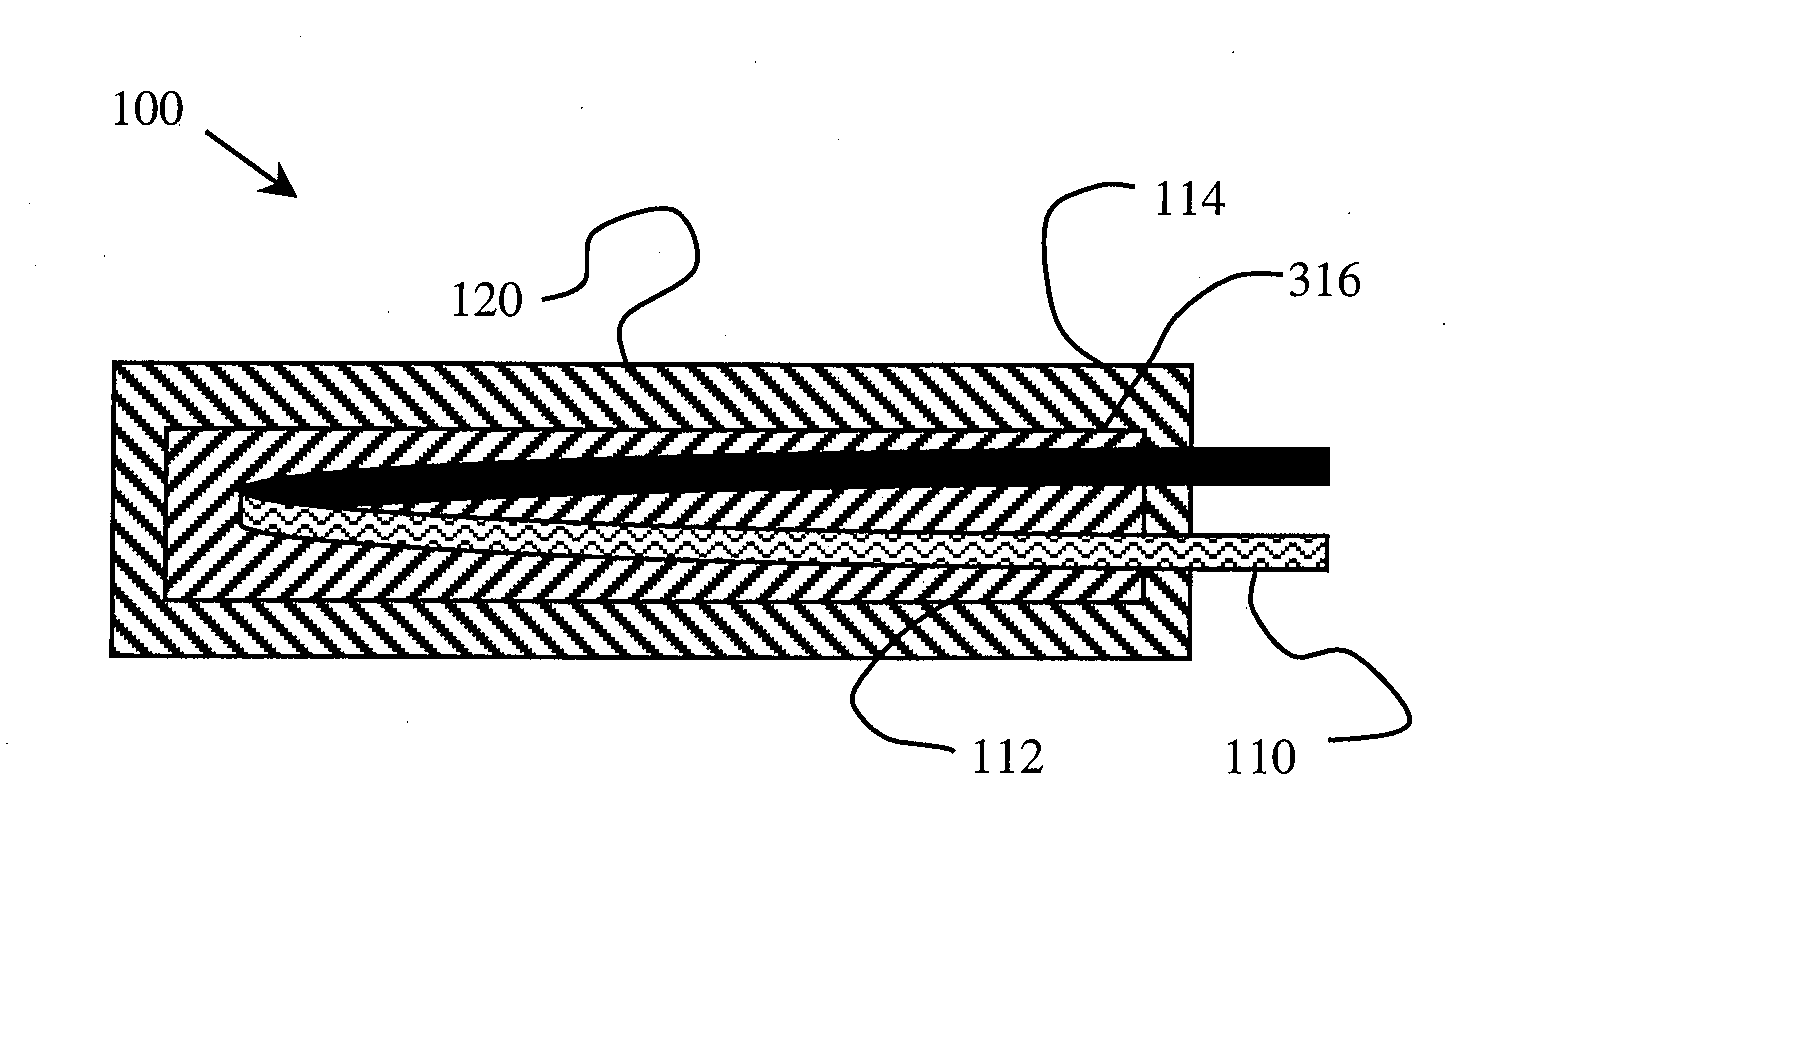 Coating composition, article, and associated method